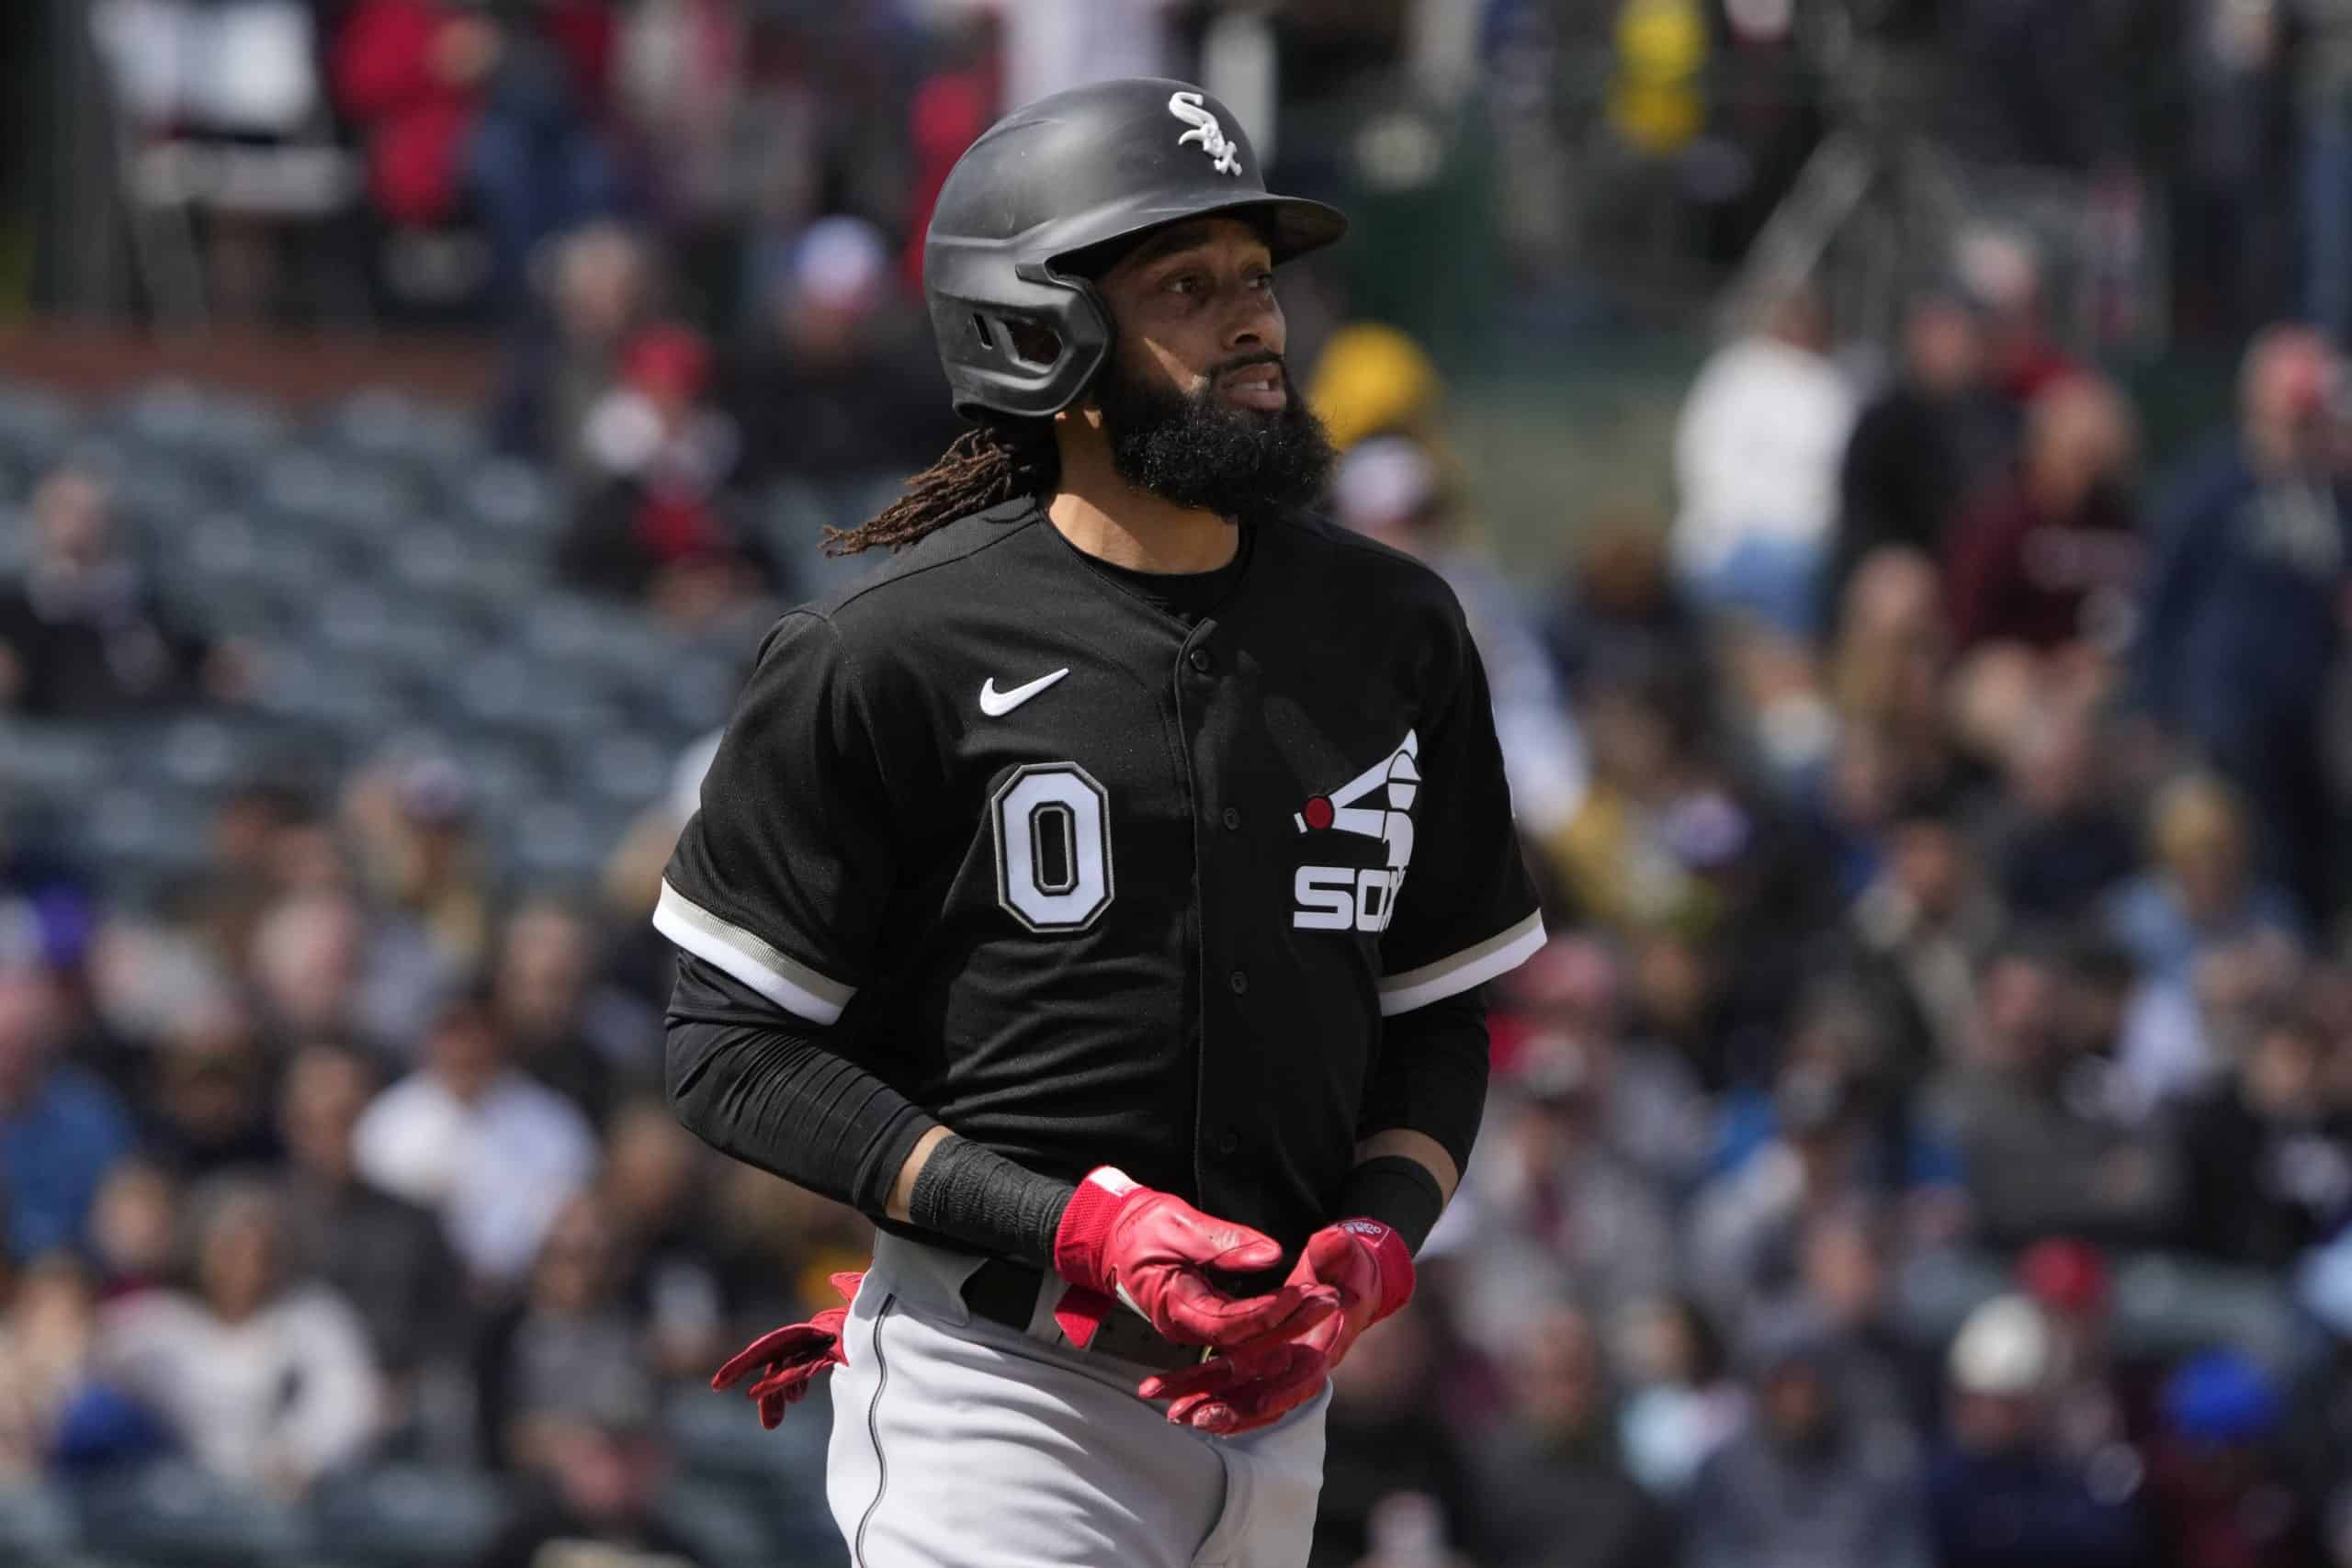 Beloved Player Projected to Make White Sox Opening Day Roster